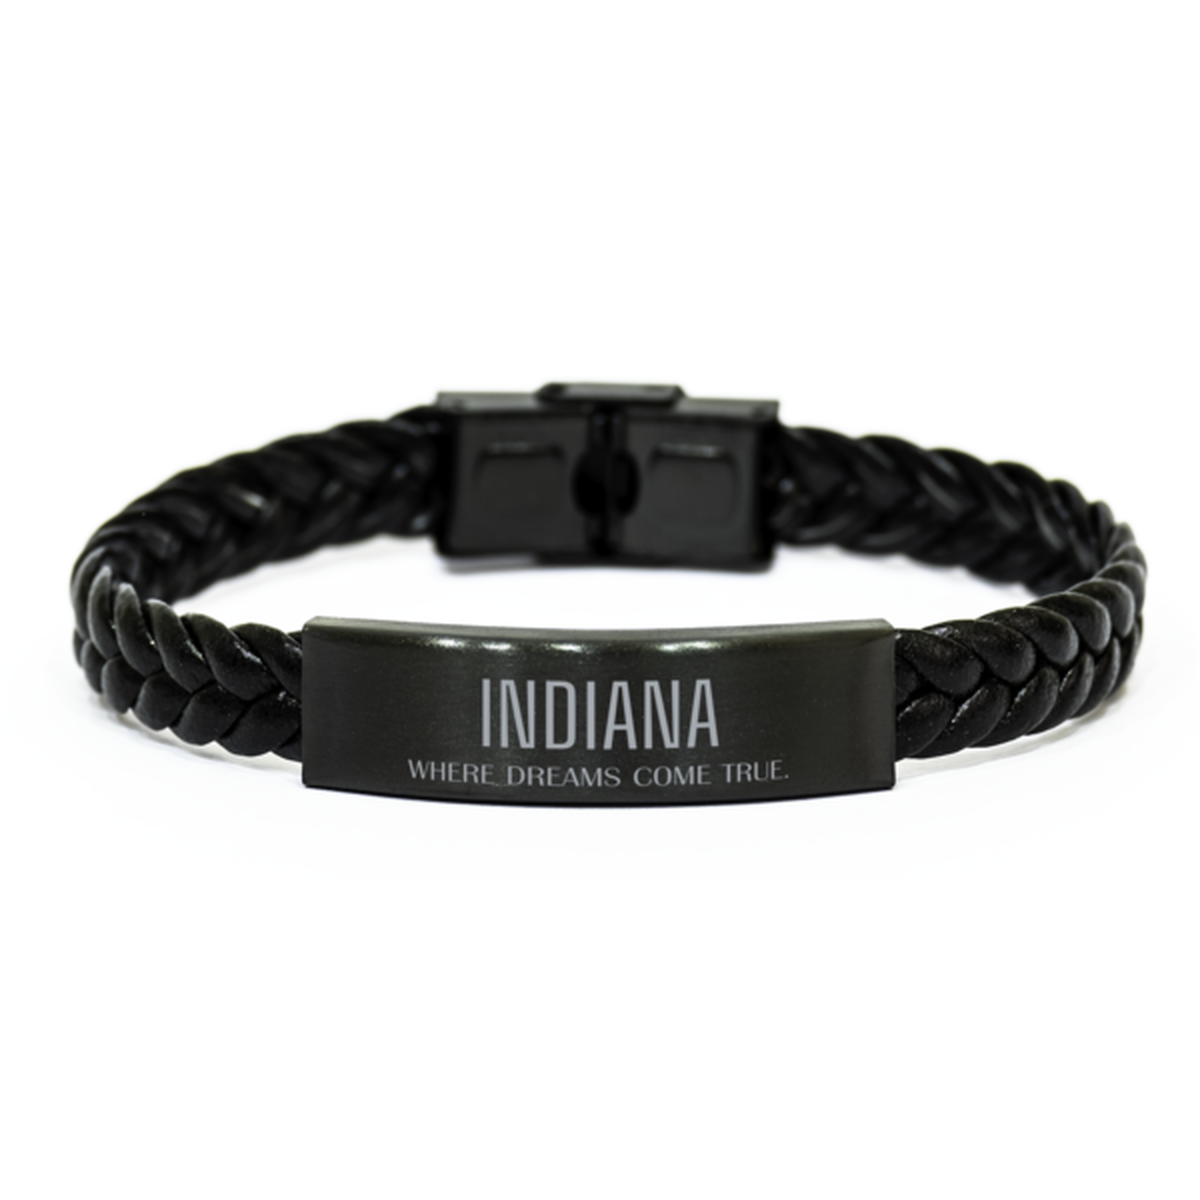 Love Indiana State Braided Leather Bracelet, Indiana Where dreams come true, Birthday Inspirational Gifts For Indiana Men, Women, Friends